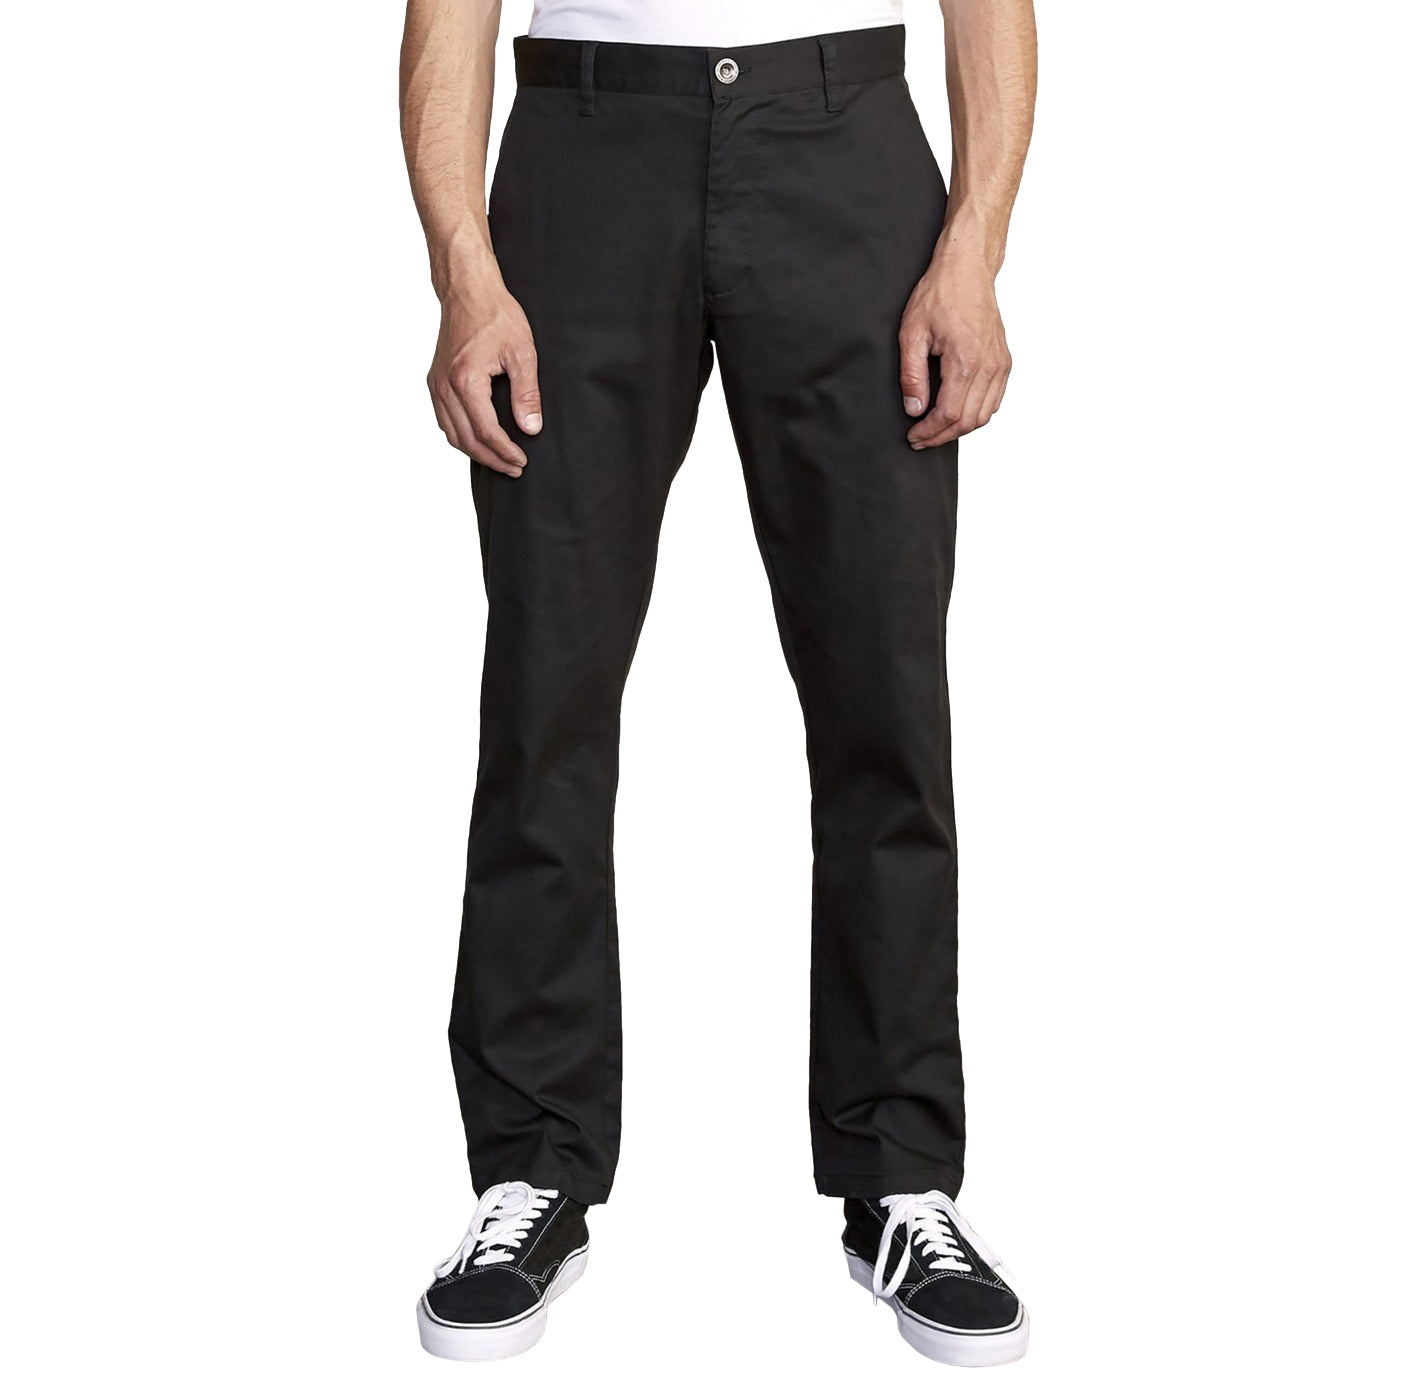 RVCA The Weekend Straight Fit Chino BLK 36